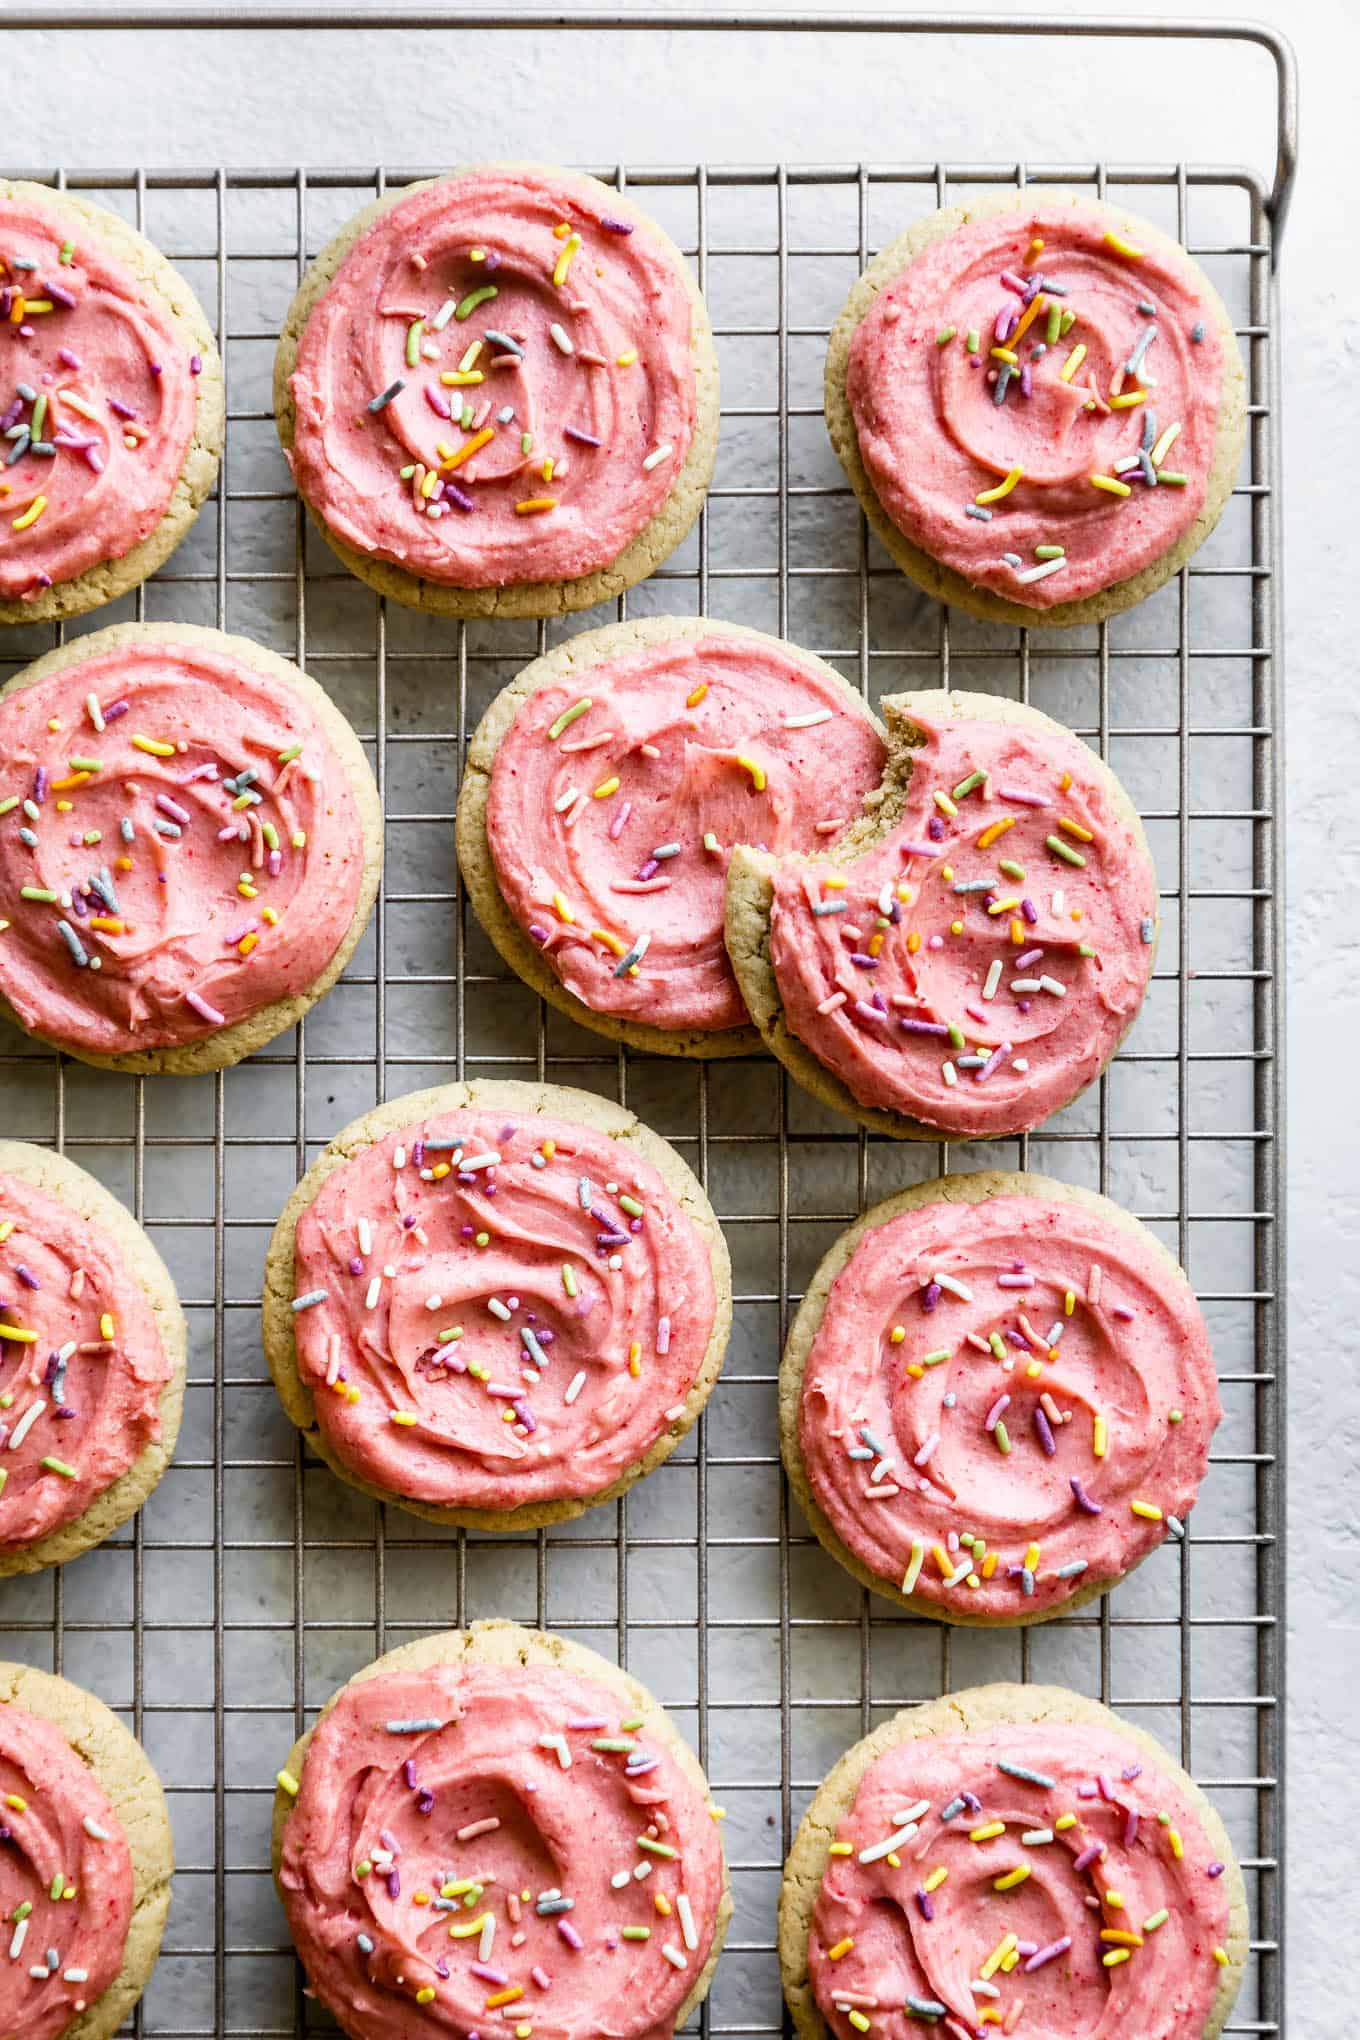 Naturally-dyed sugar cookie butercream frosting